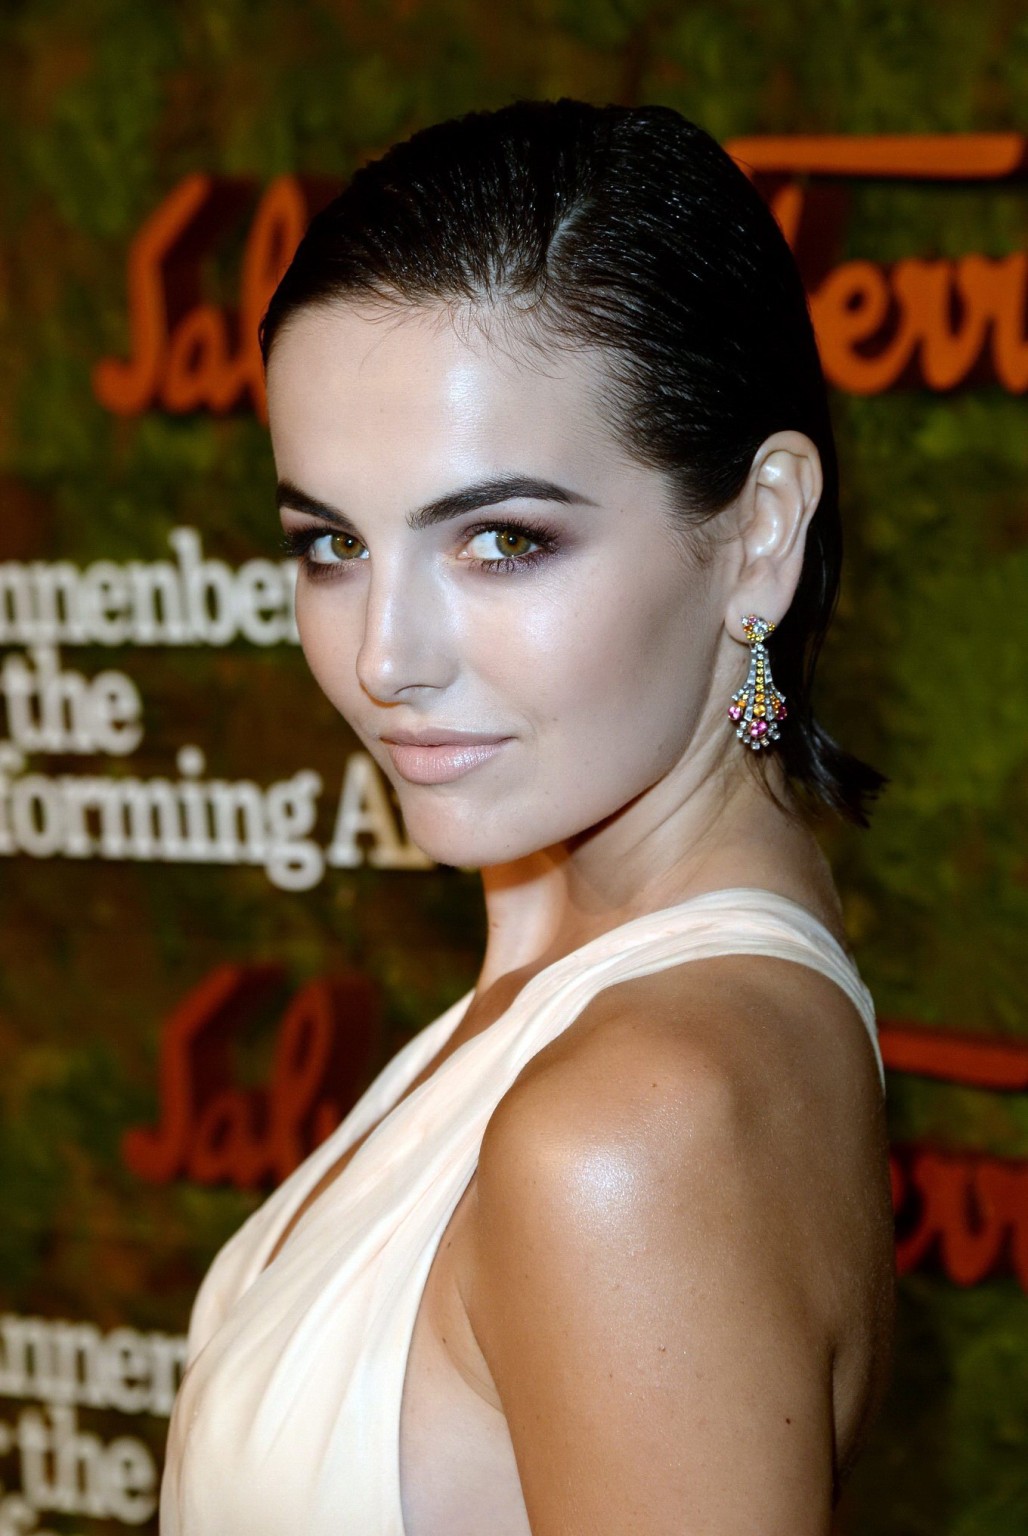 Camilla Belle showing huge cleavage at Wallis Annenberg Performing Arts Gala in  #75215494